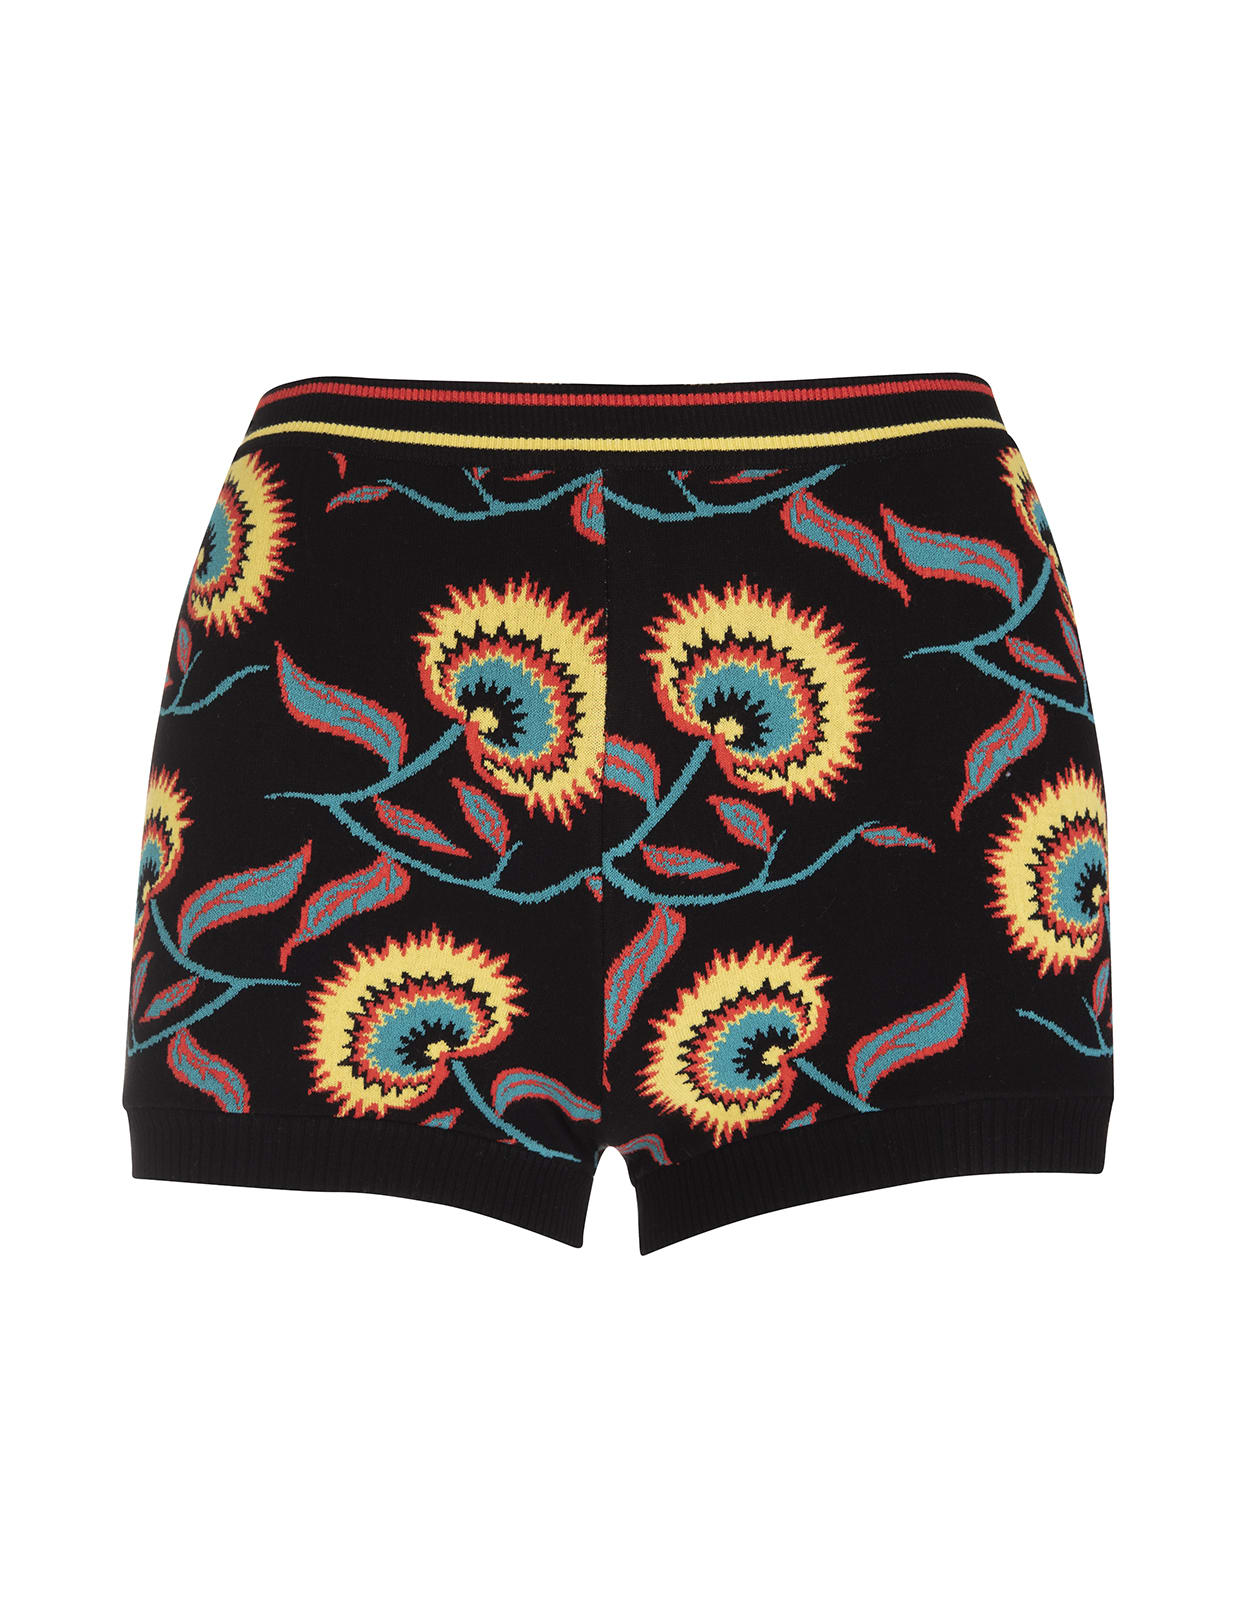 PACO RABANNE BLACK KNITTED SHORTS WITH FLORAL JACQUARD MOTIF